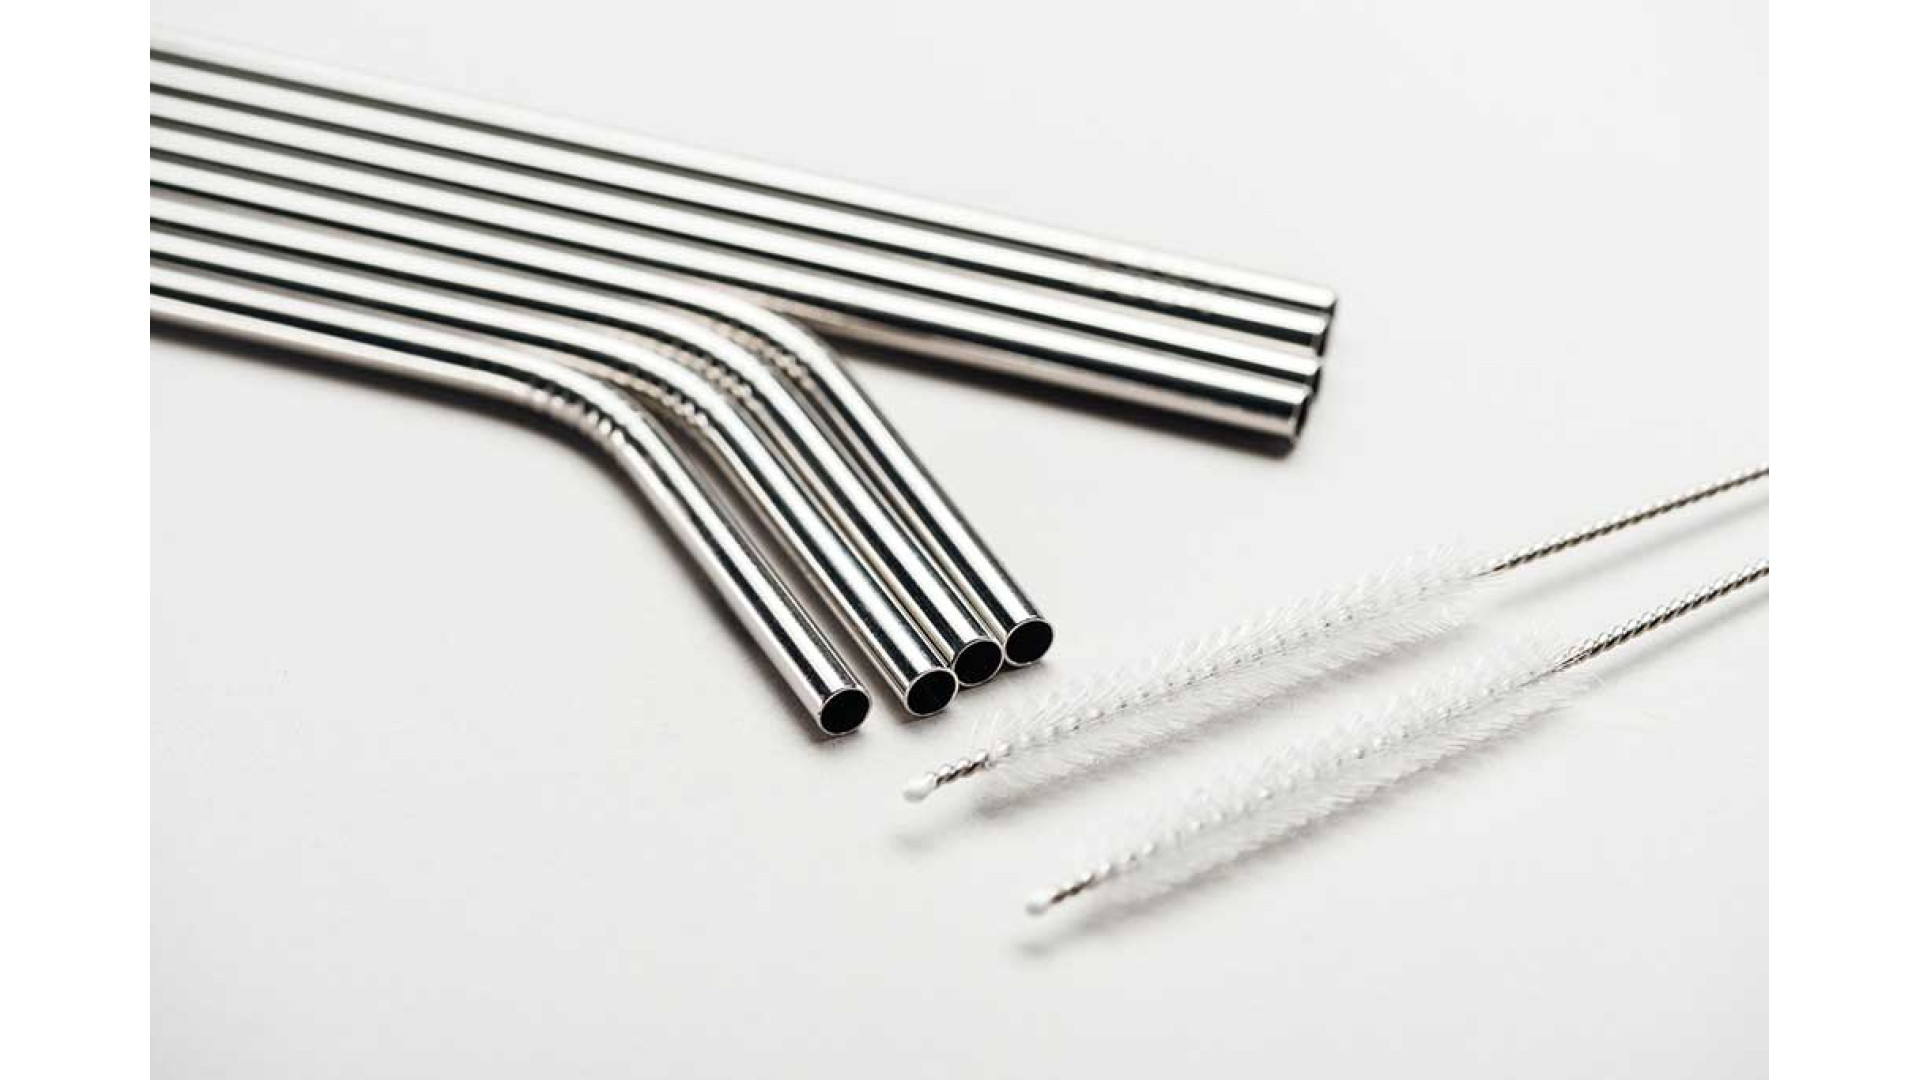 https://www.ckbproducts.com/image/cache/catalog/Ckb%20blog/stainless-steel-straws-are-the-best-1920x1080.jpg